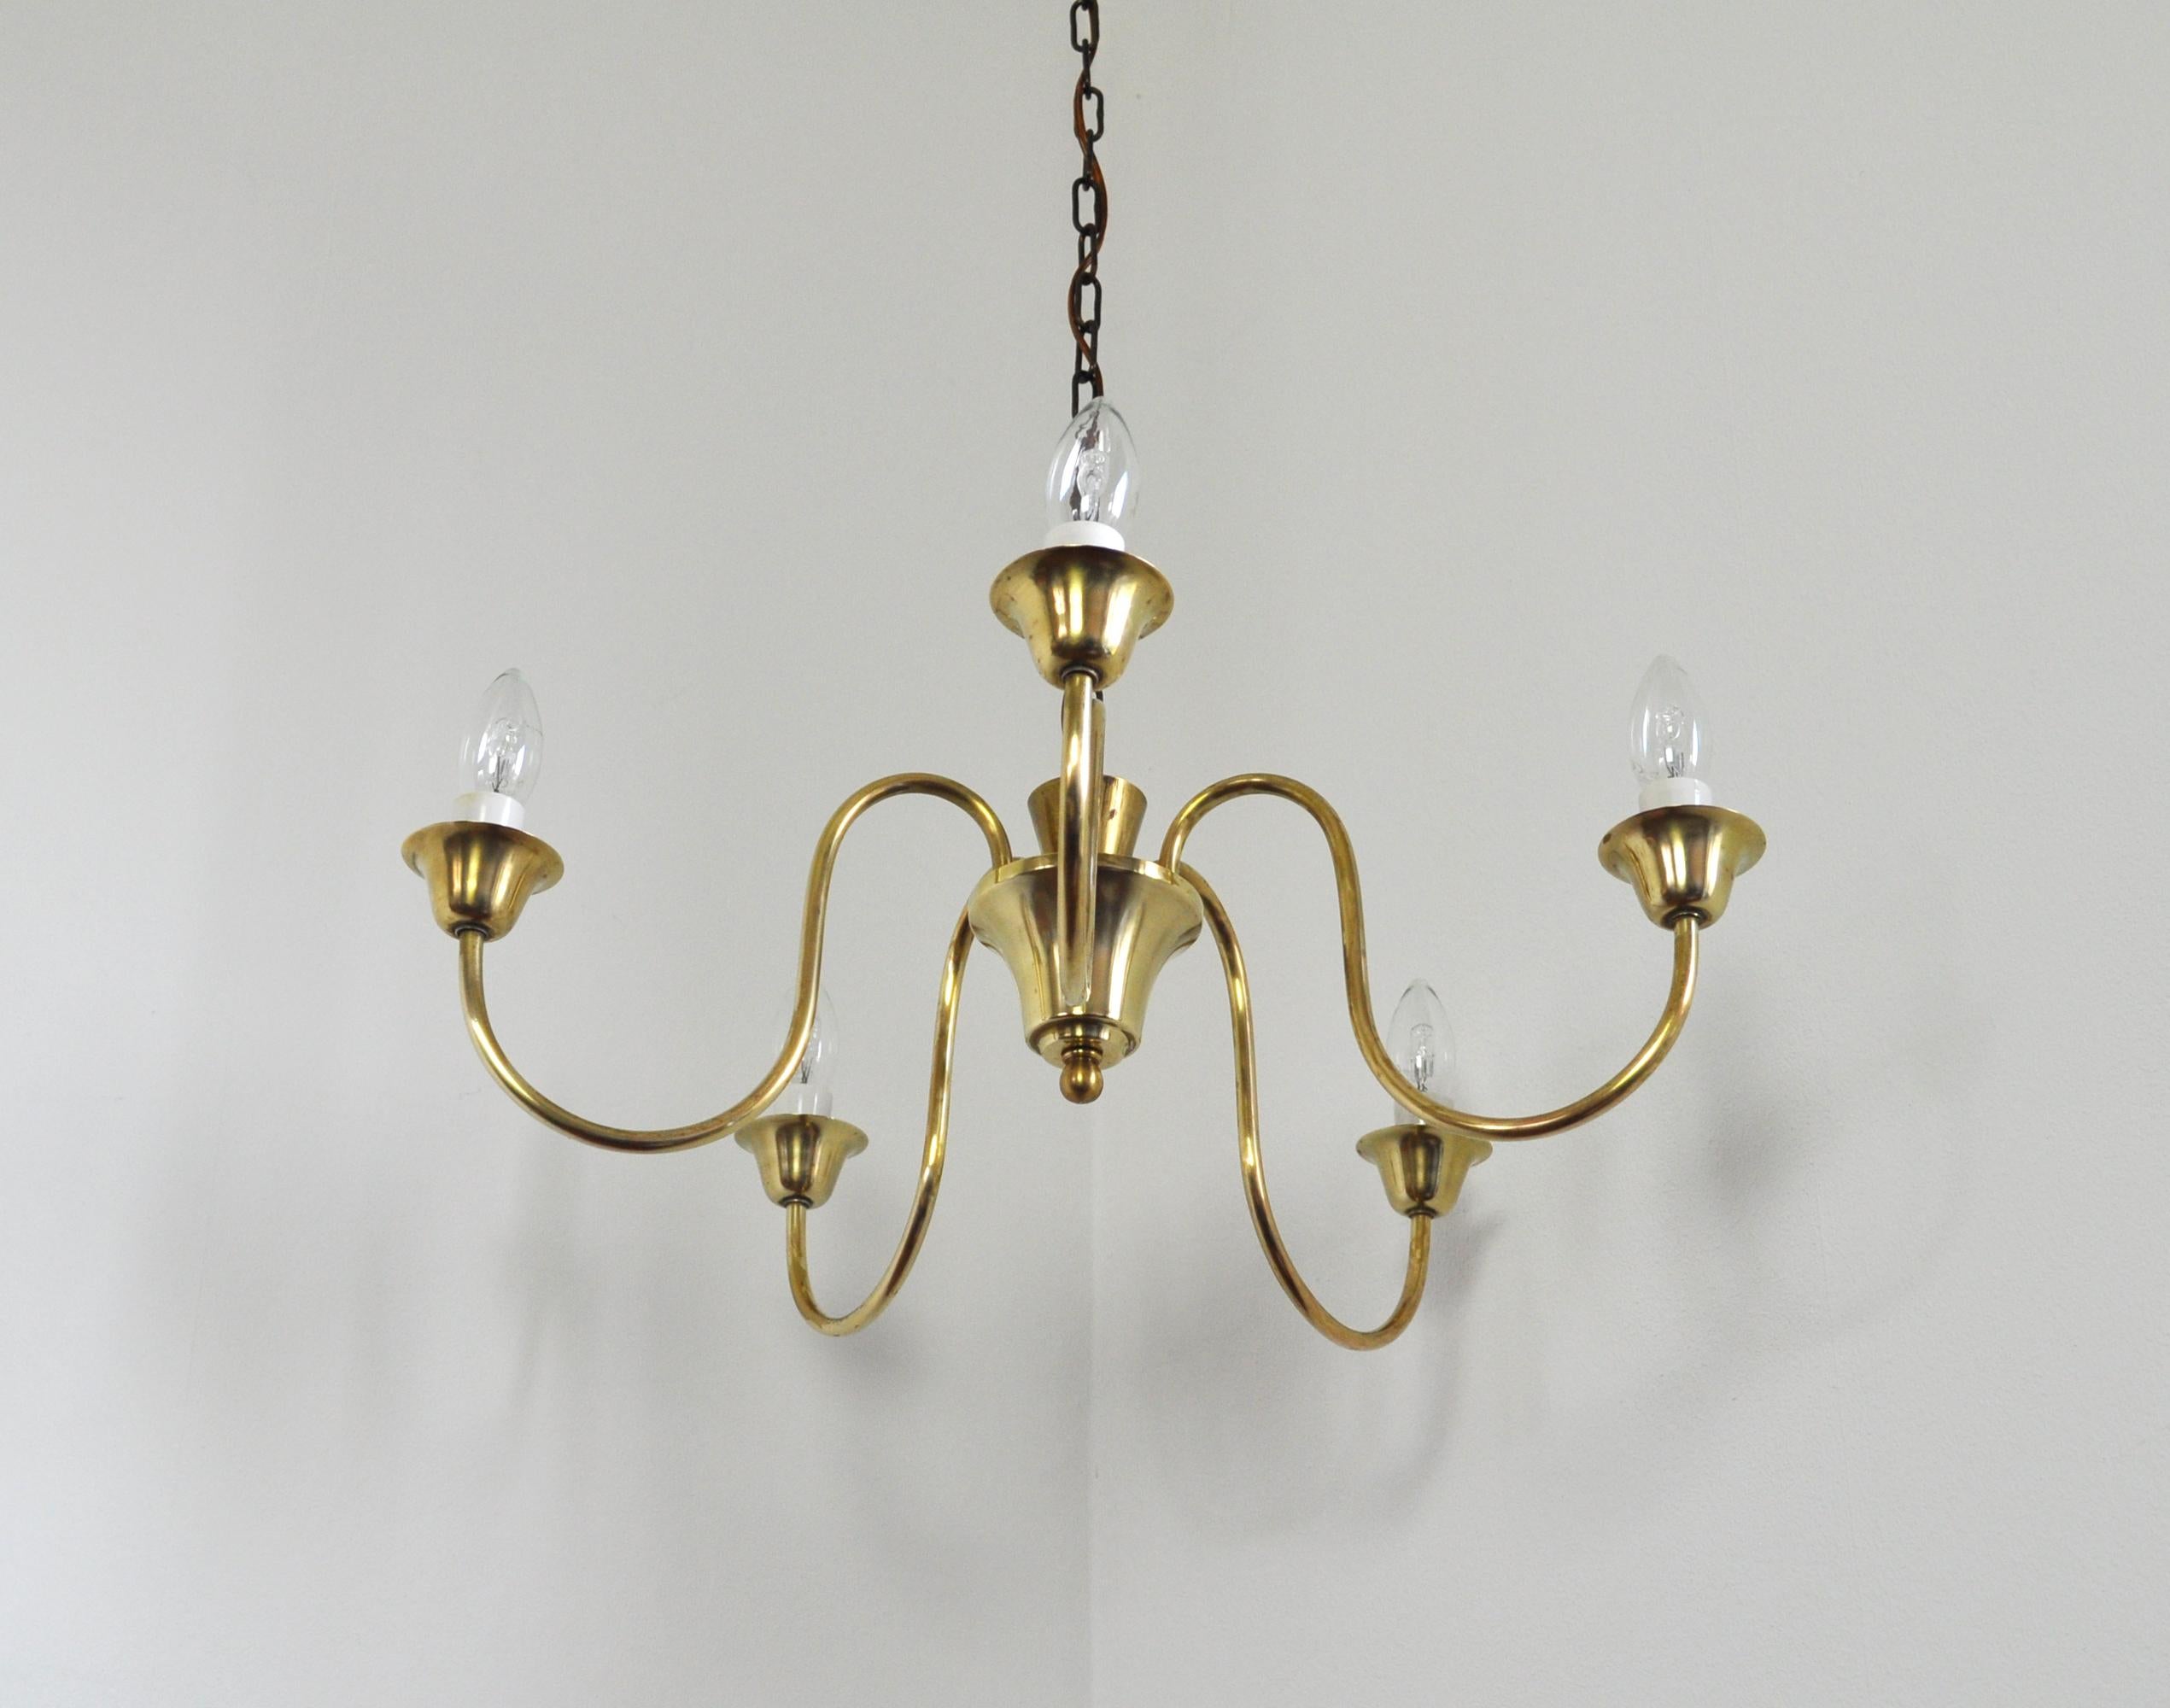 Solid brass five-arm chandelier by Fog & Mørup, Denmark, 1950s.

Dimensions: Height 19 cm, diameter 55 cm.
Full length with chain 133 cm.